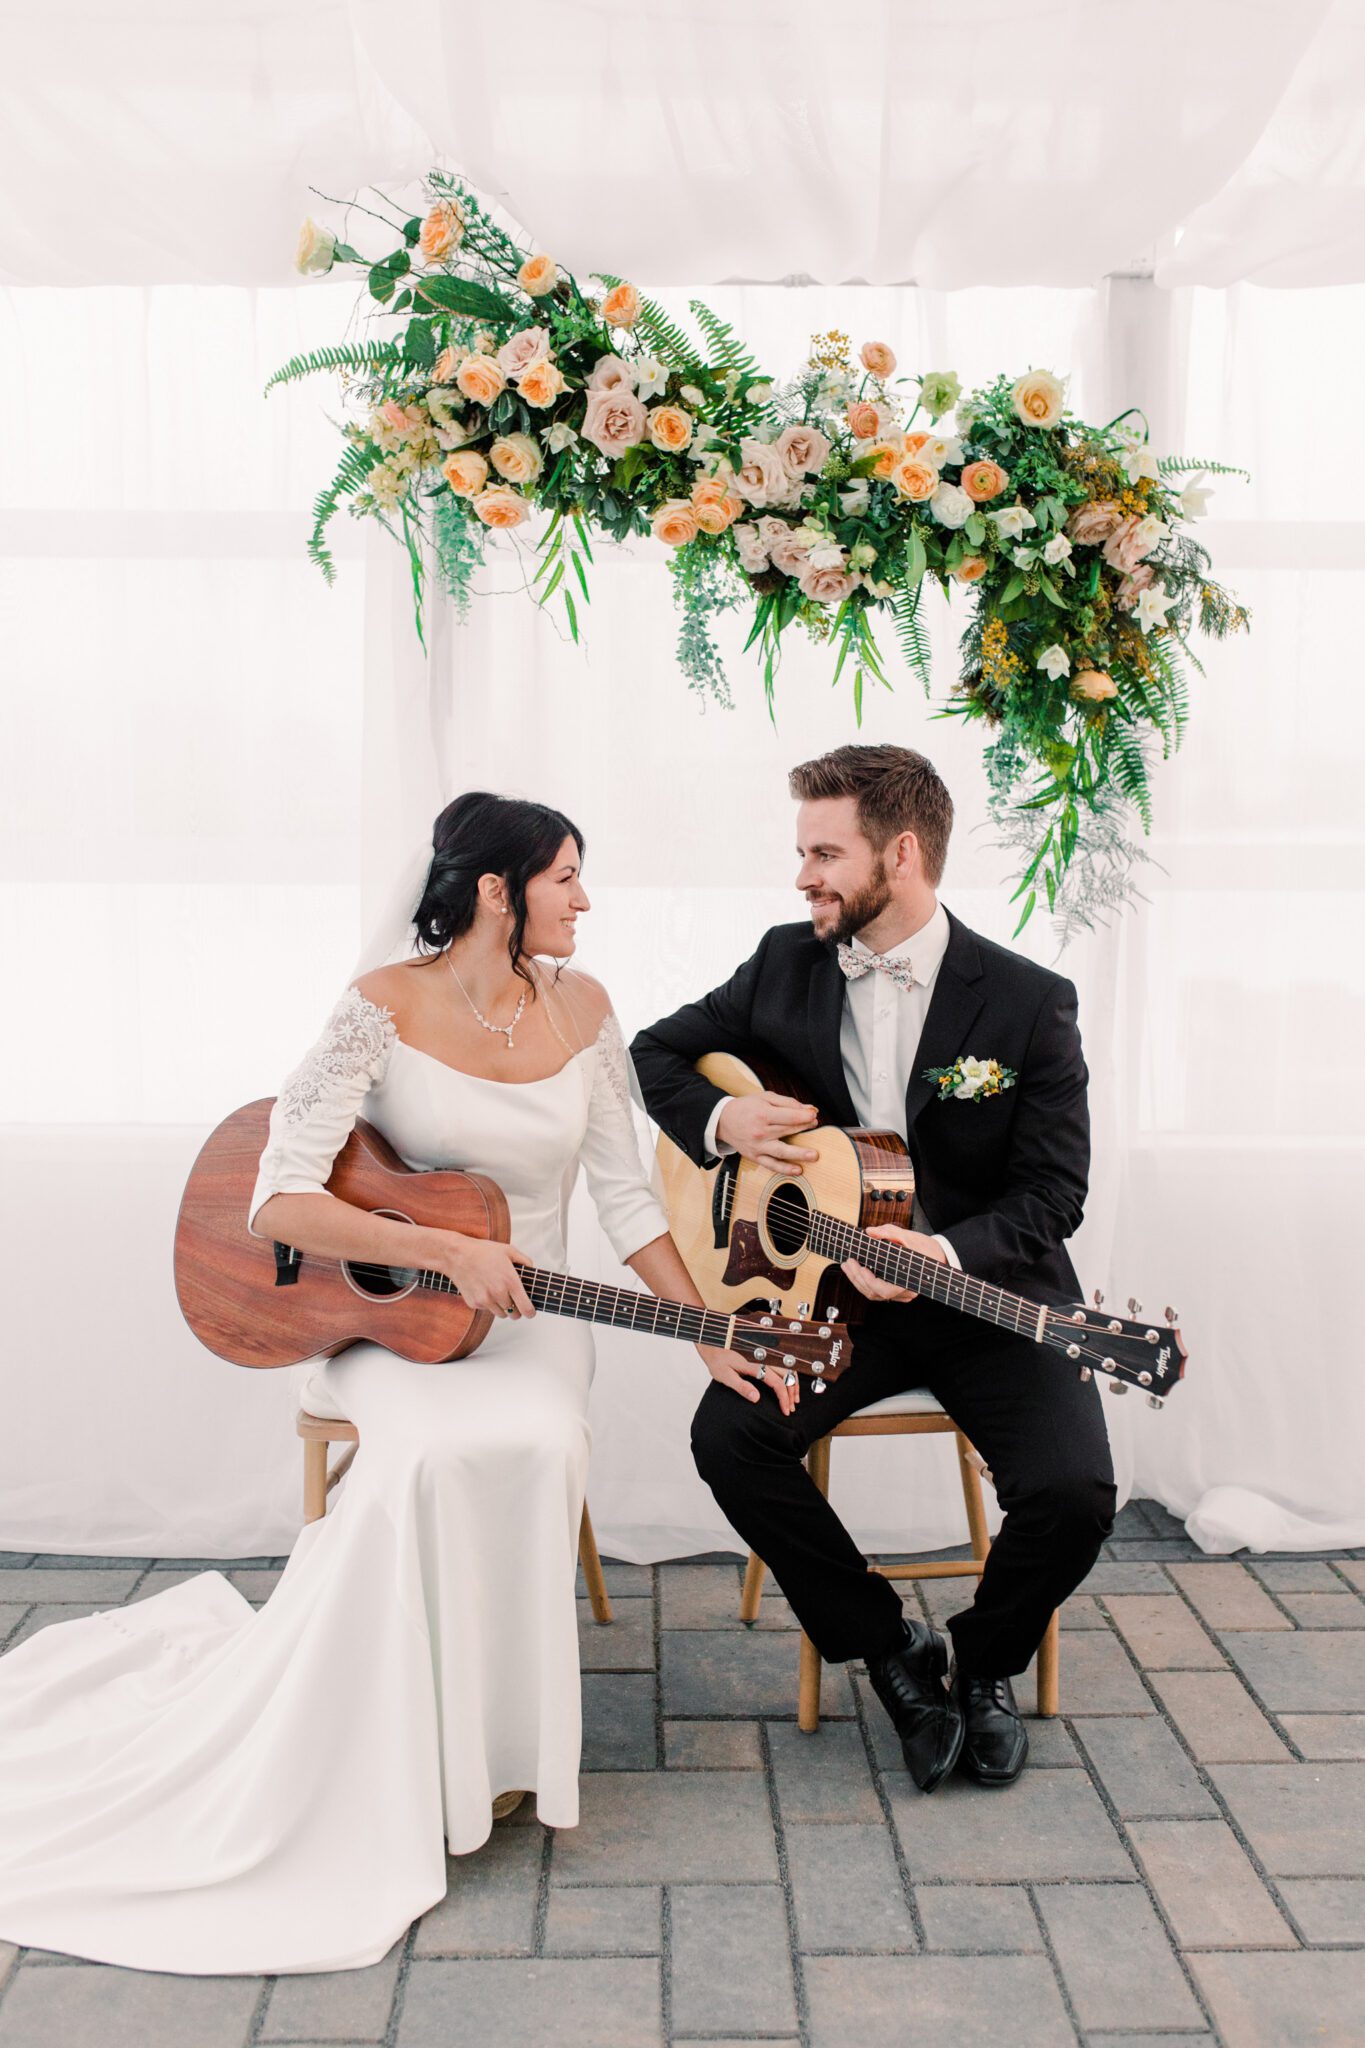 Fun bride and groom playing guitar at summer tented wedding reception, spring inspired floral installation designed by Little Petal Company featuring roses and cascading ferns